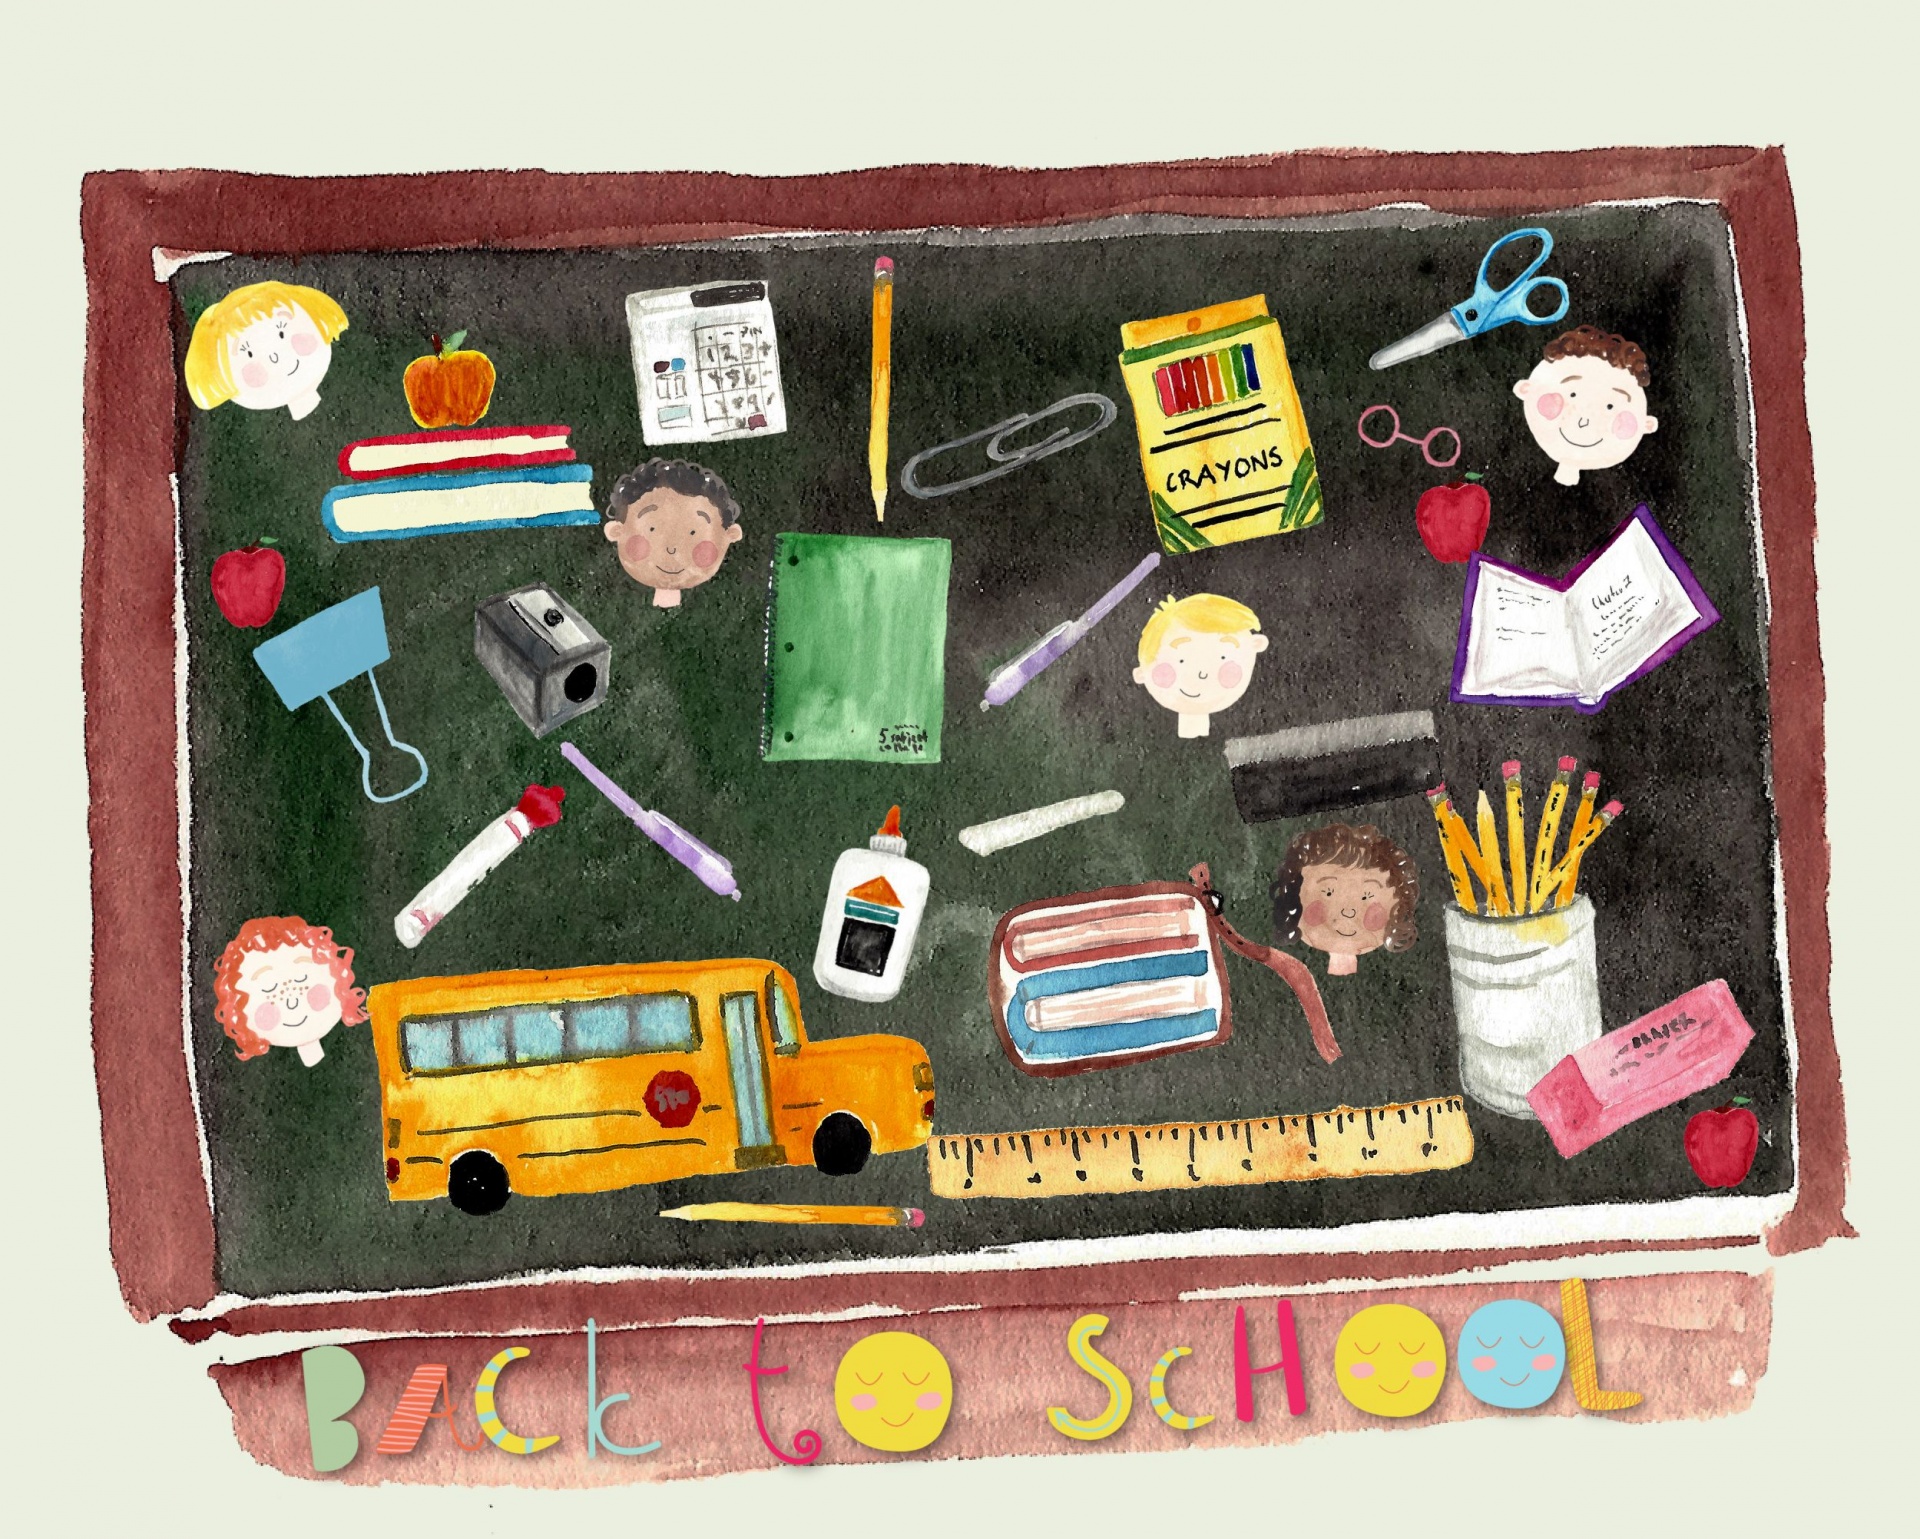 chalkboard with watercolor images of school supplies and happy children